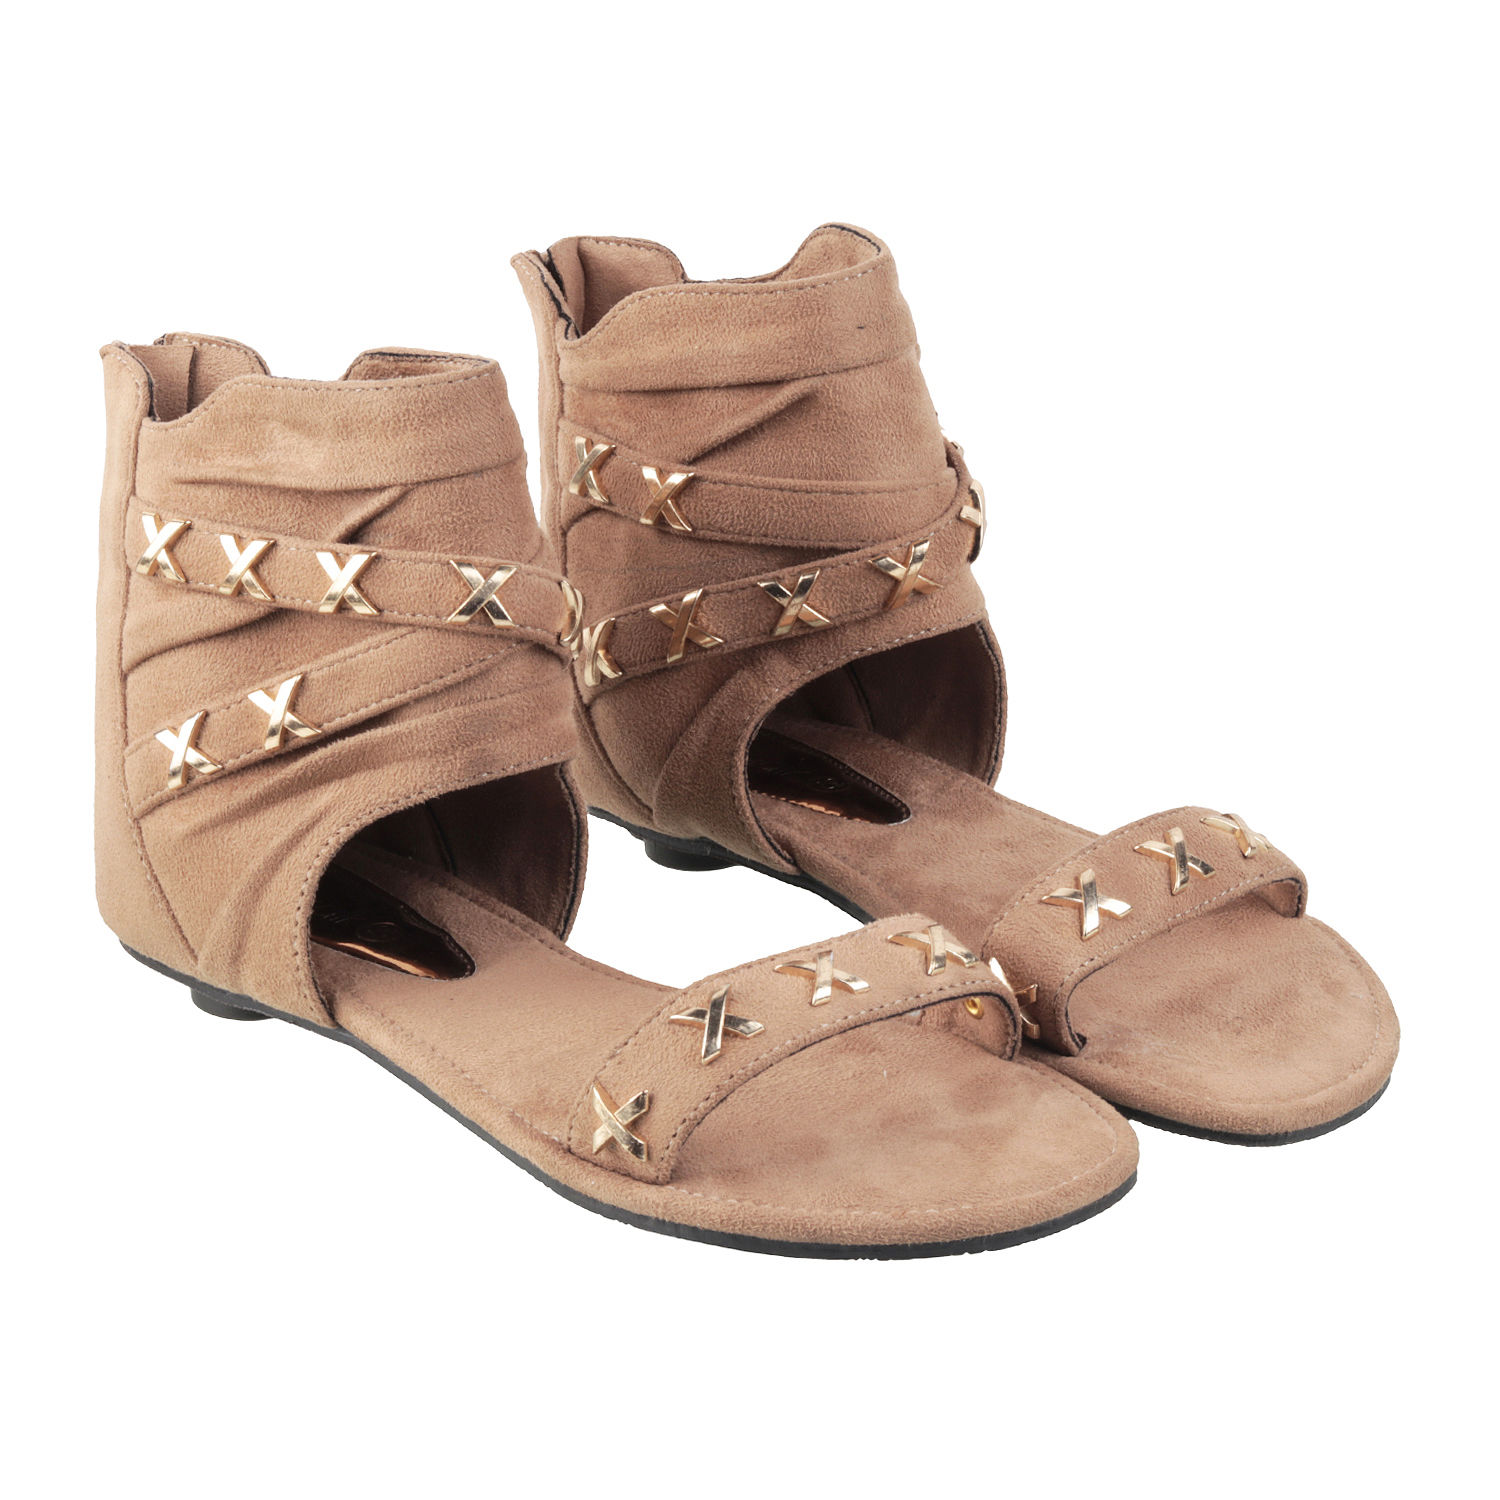 Buy Tall Gladiator Sandals Online In India - Etsy India